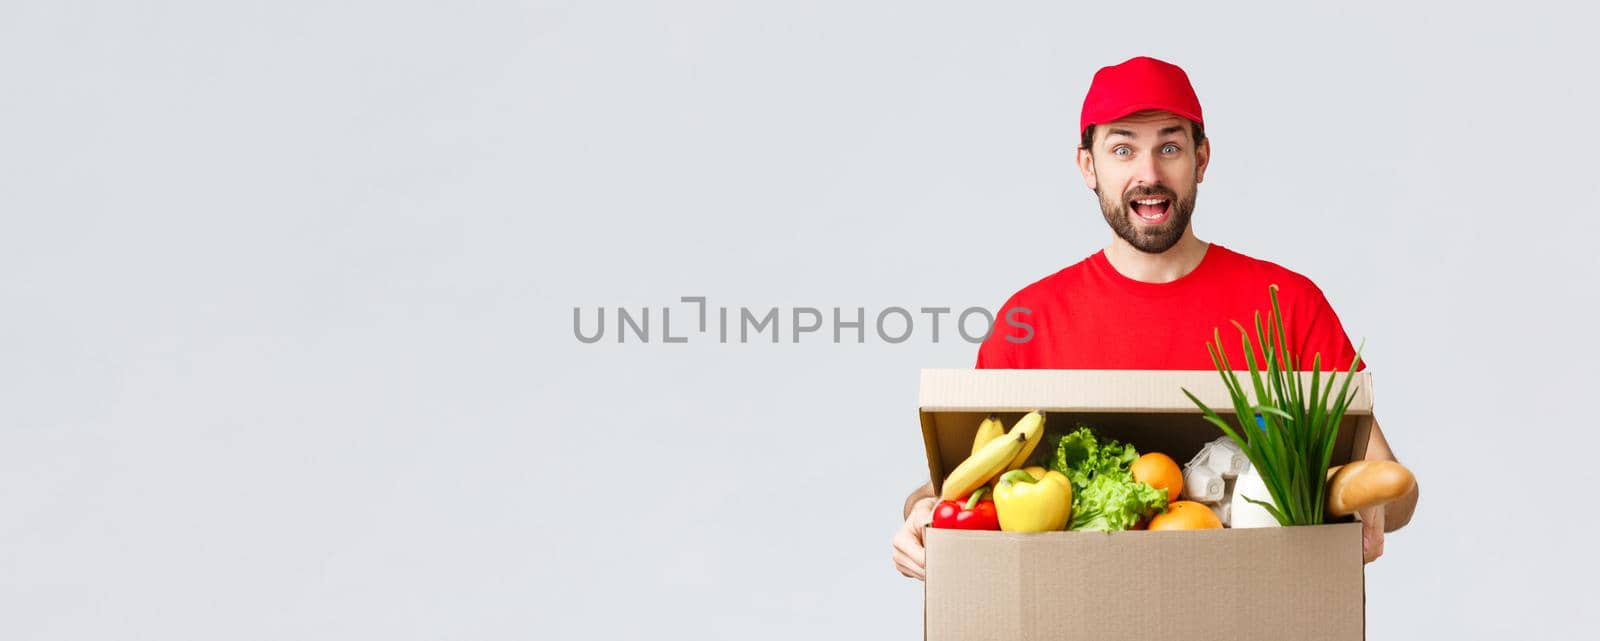 Groceries and packages delivery, covid-19, quarantine and shopping concept. Smiling handsome bearded courier in red uniform, bring food package, grocery order to client in box, look amused.